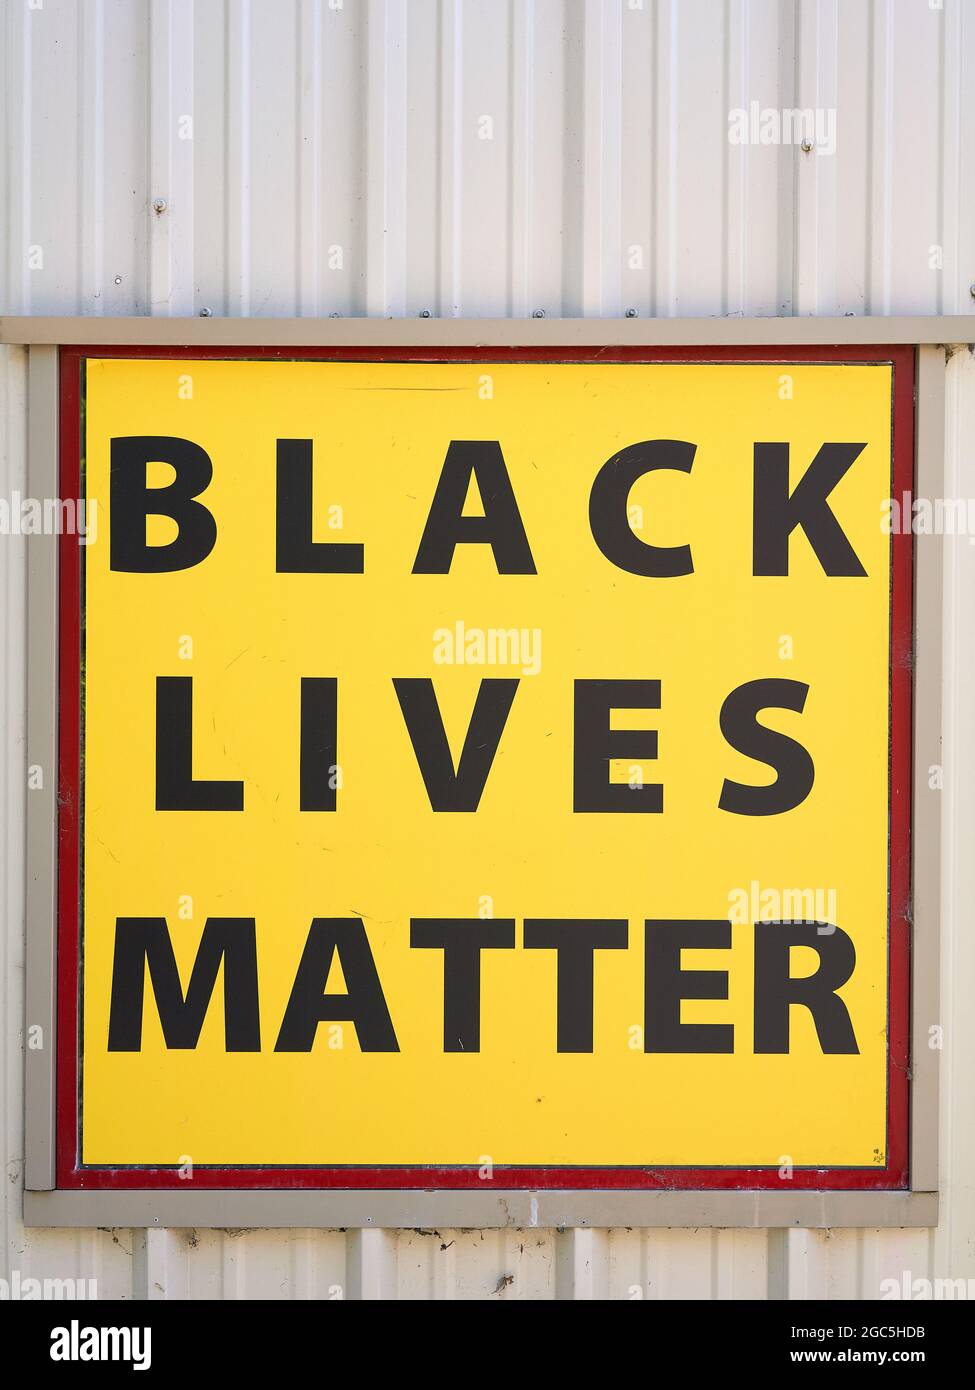 Black Lives Matter sign on yellow background on metal building wall. Stock Photo